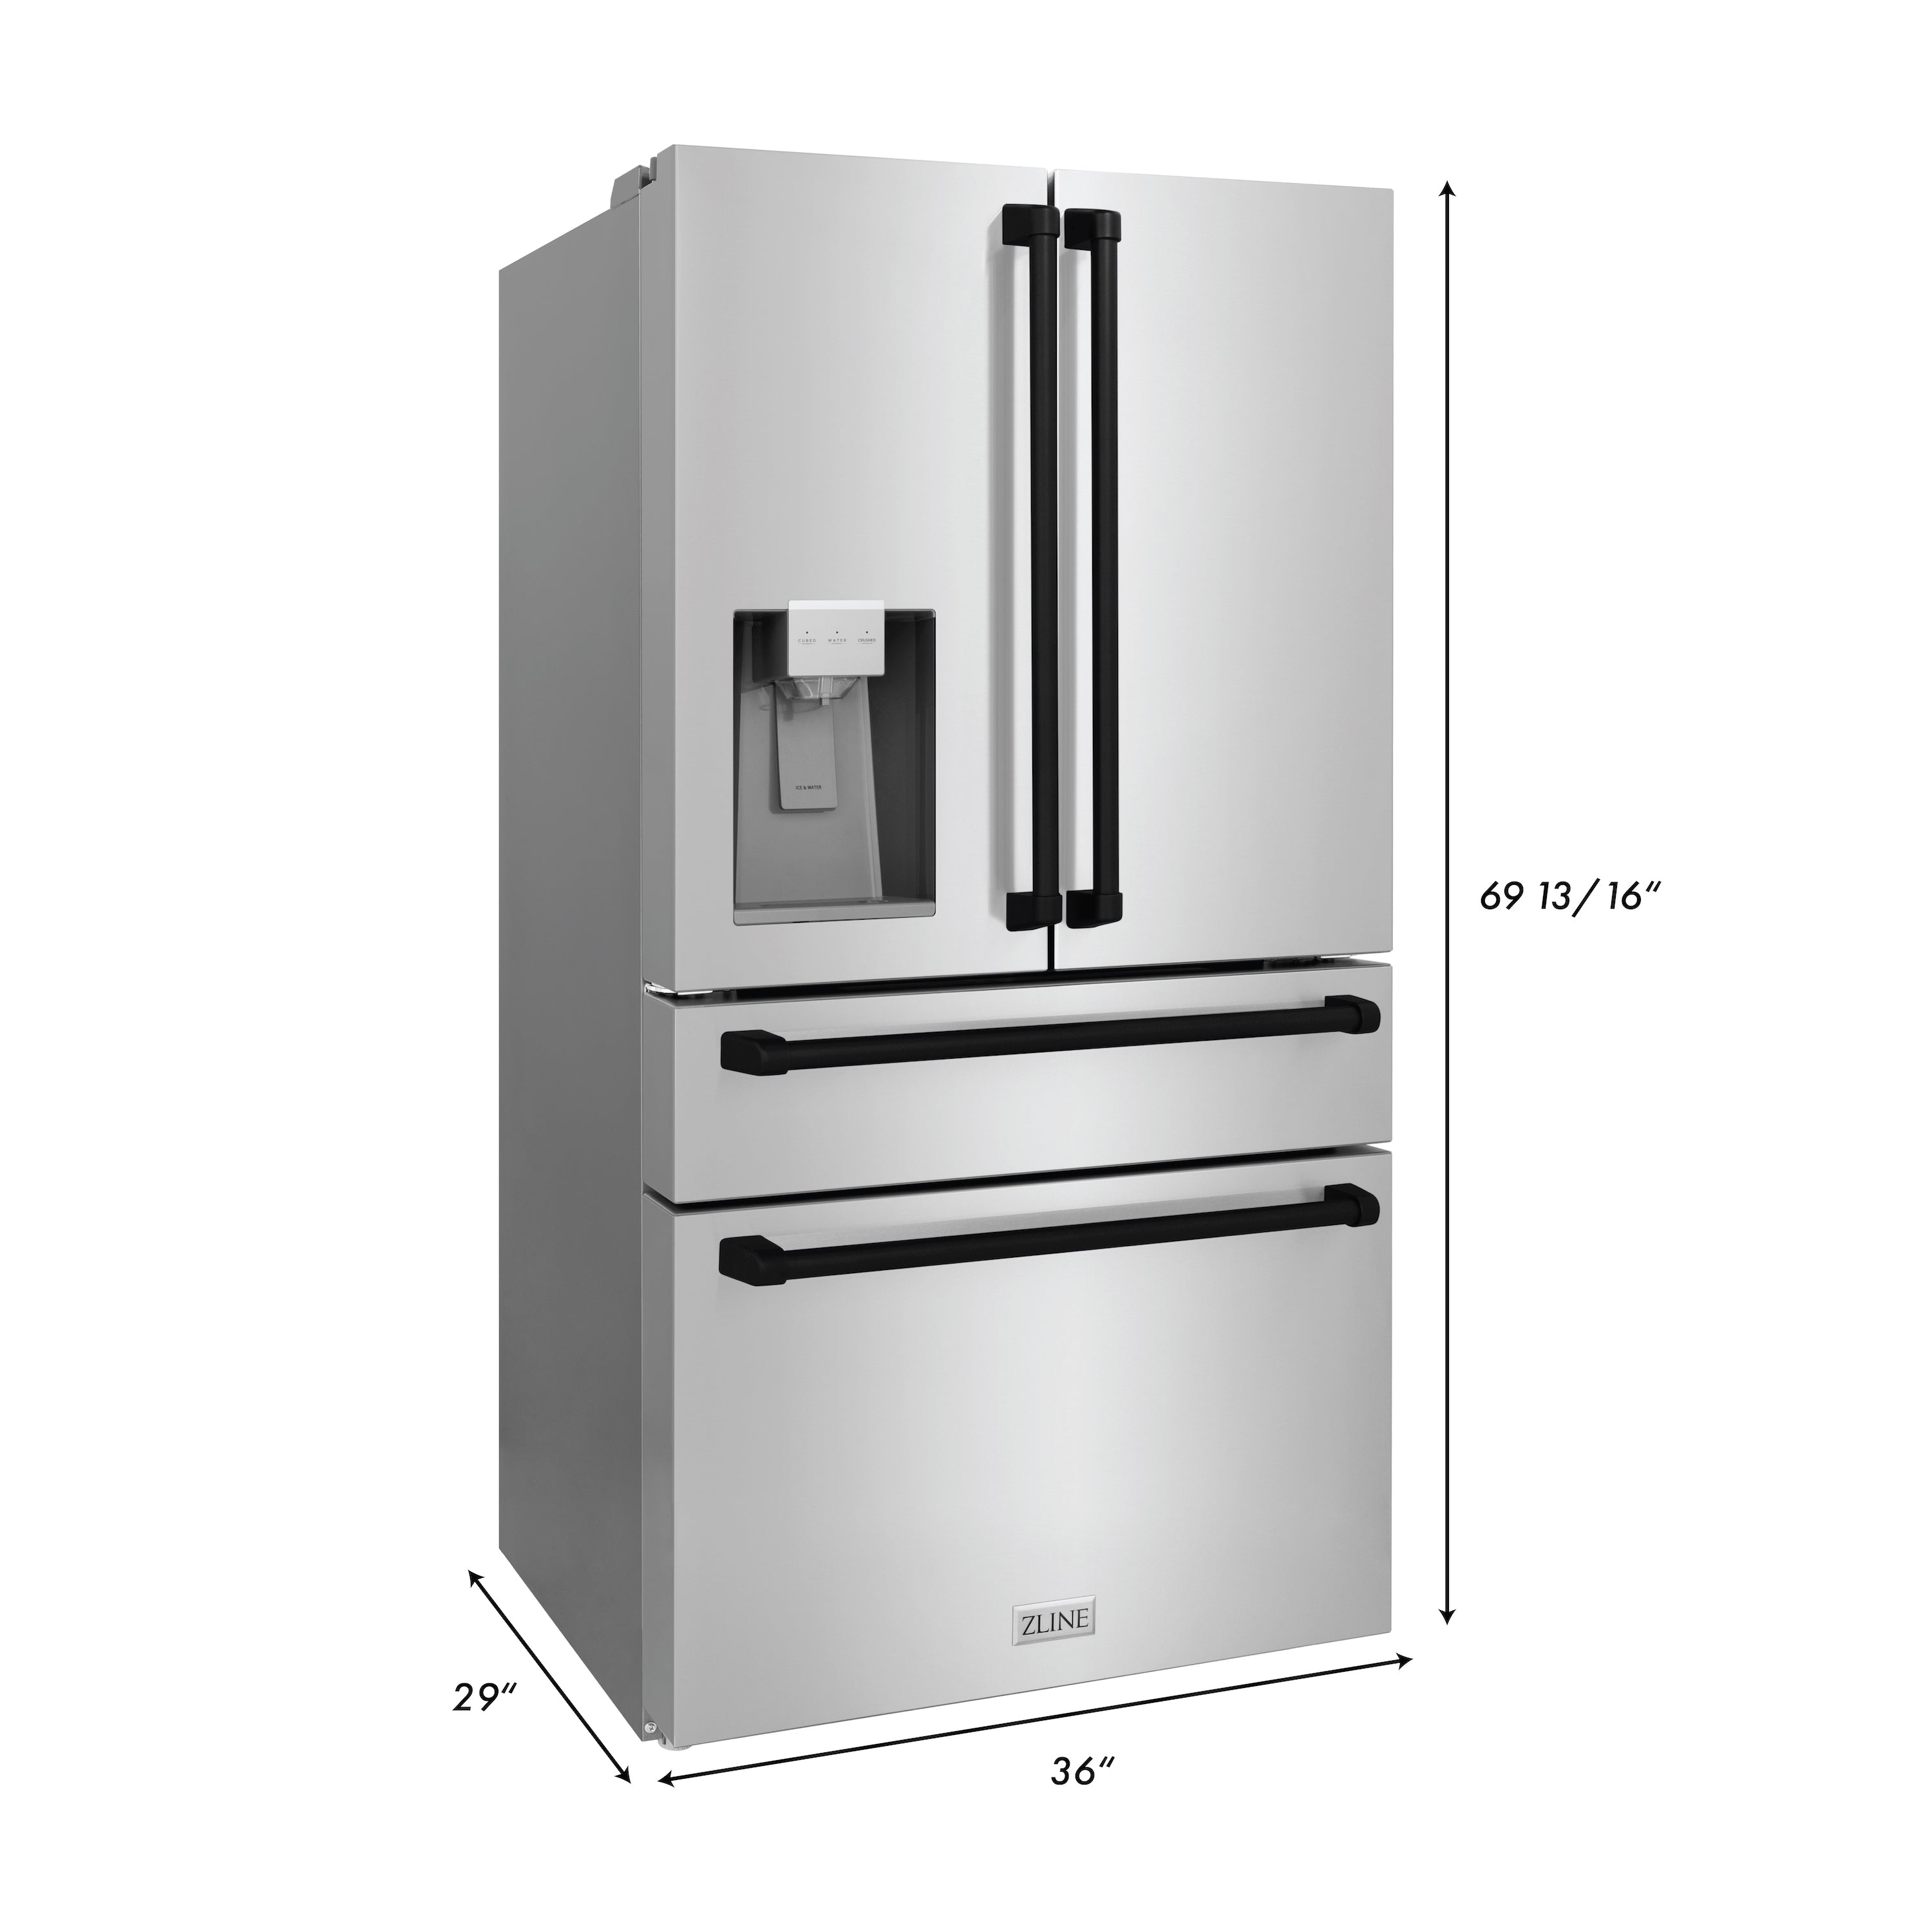 ZLINE Autograph Edition 36" French door refrigerator with water/ice dispenser dimensional measurements.